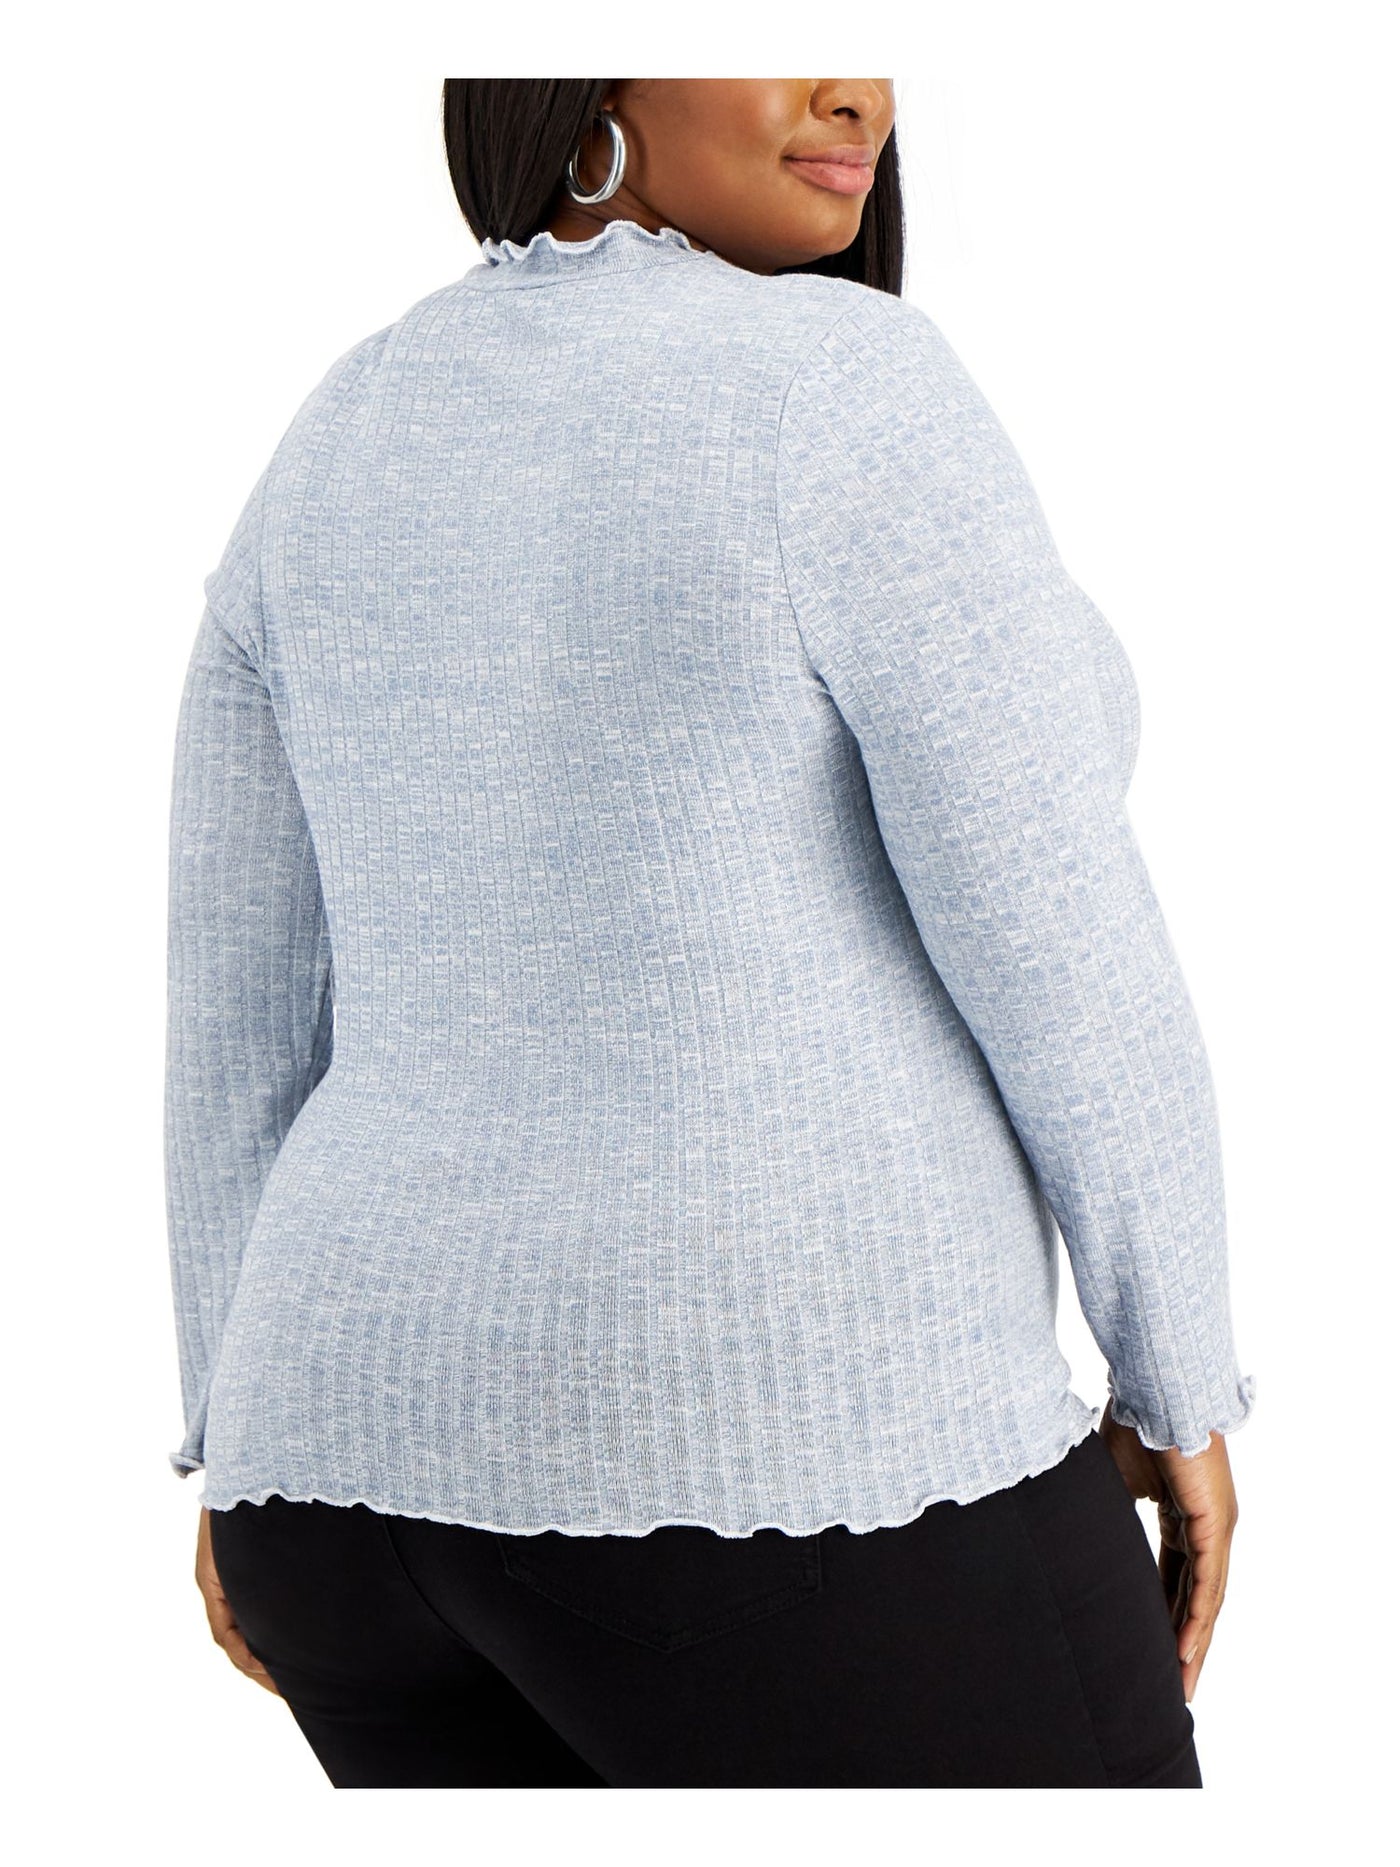 REBELLIOUS ONE Womens Light Blue Stretch Ribbed Scalloped Long Sleeve Turtle Neck Sweater Plus 2X